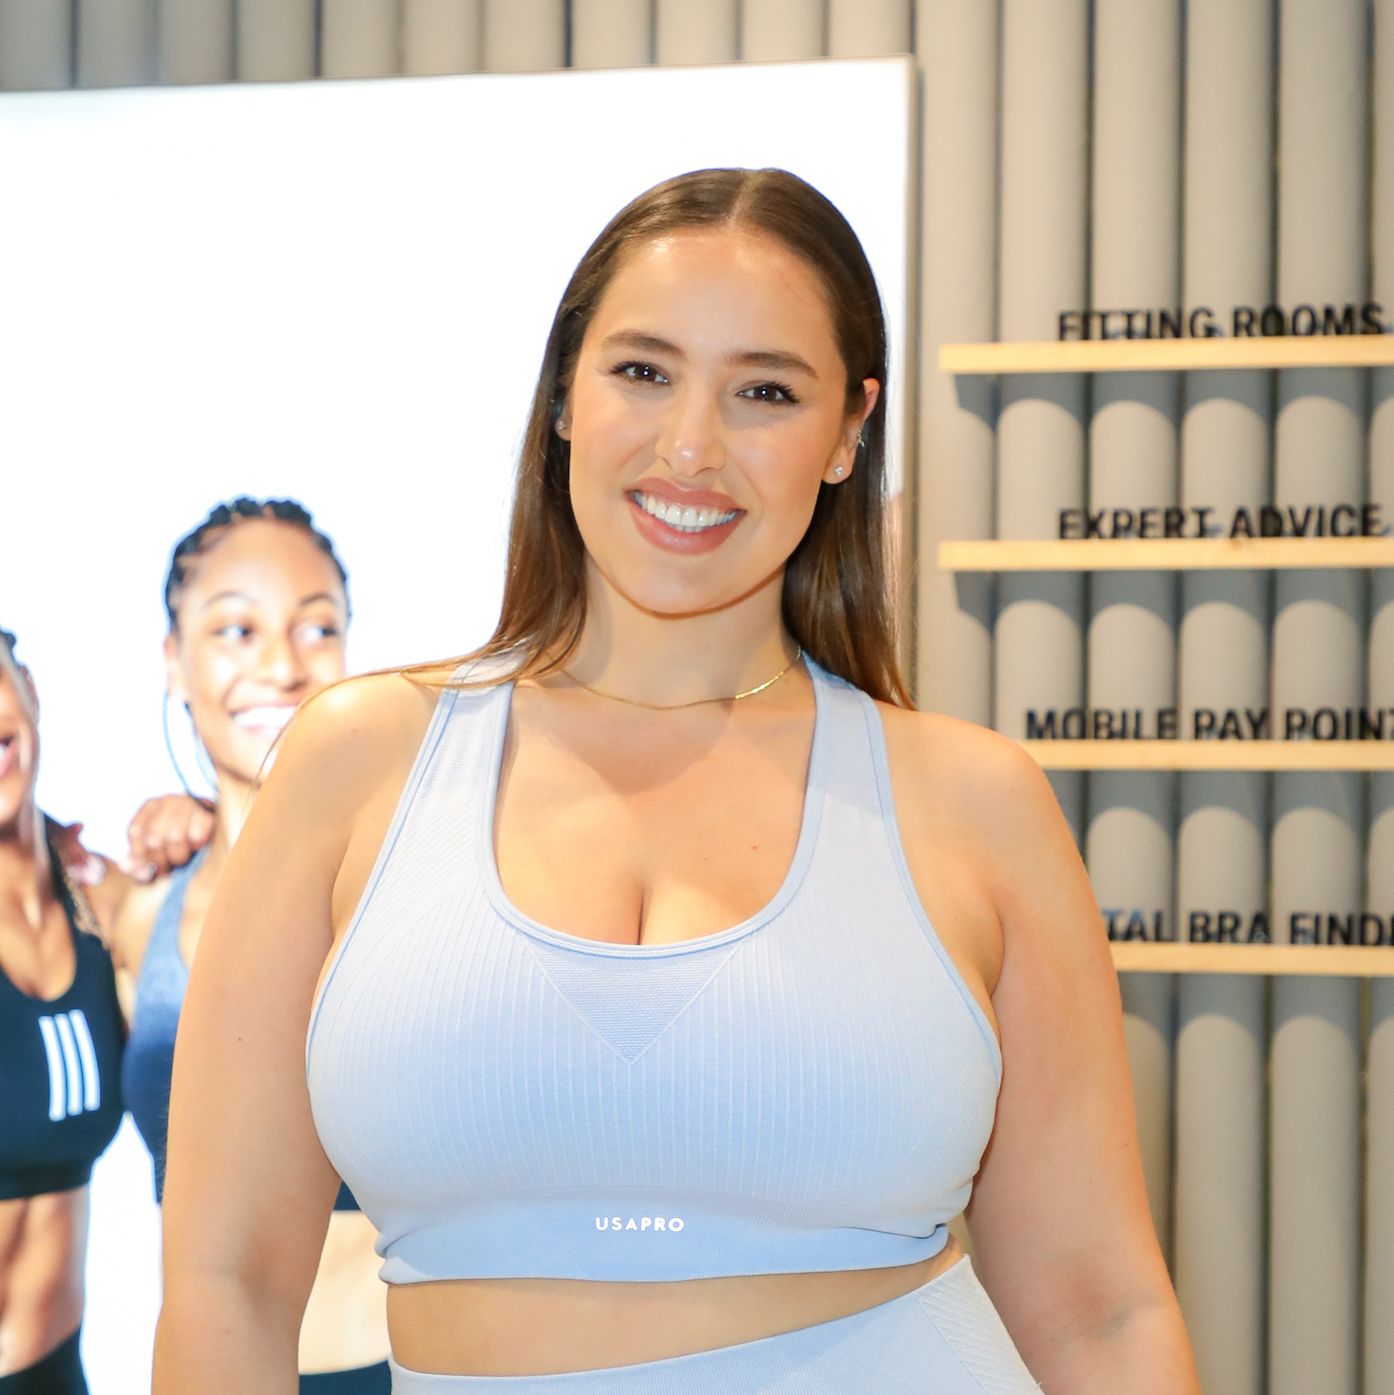 alice pullin recommends big boobs in gym pic